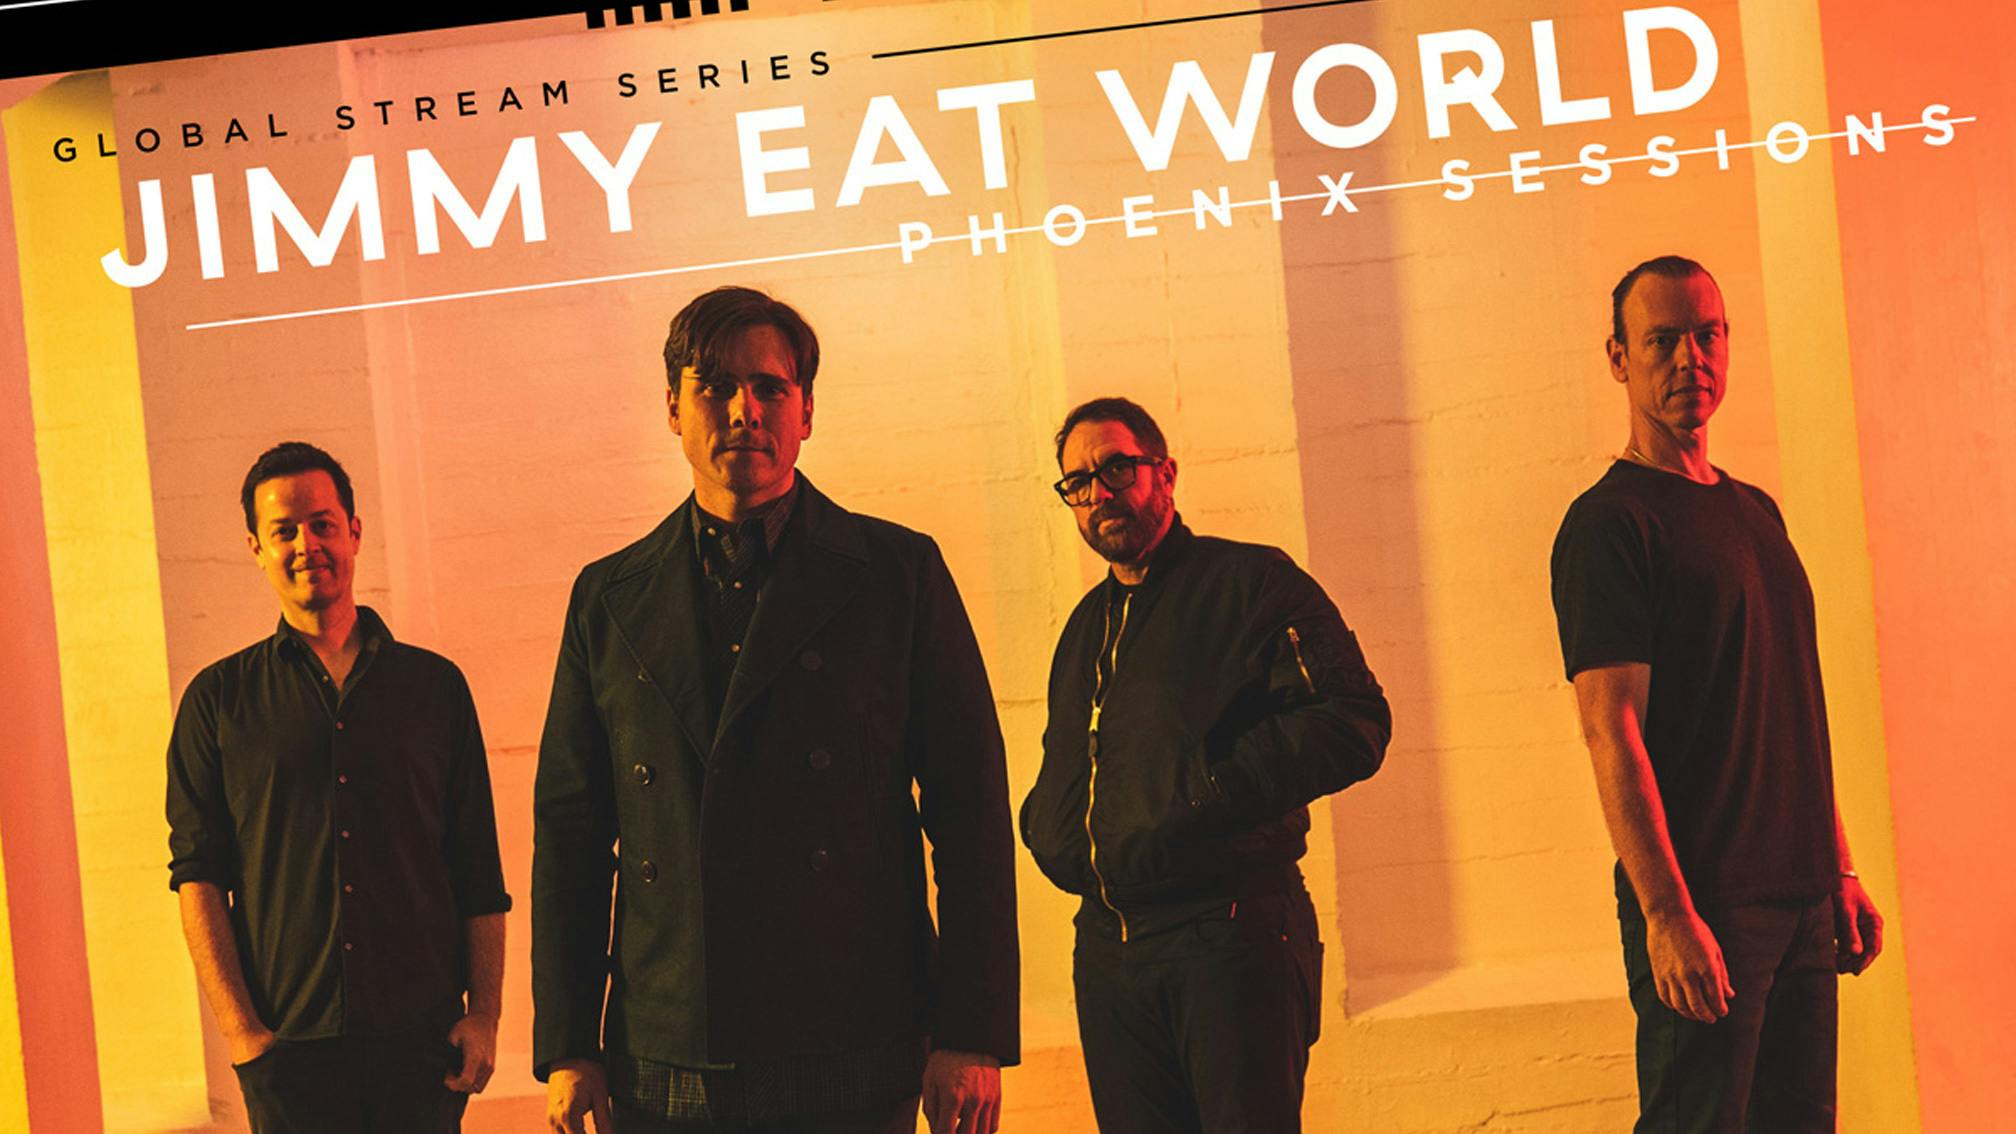 Jimmy Eat World to play Surviving, Futures and Clarity in full across three global streams